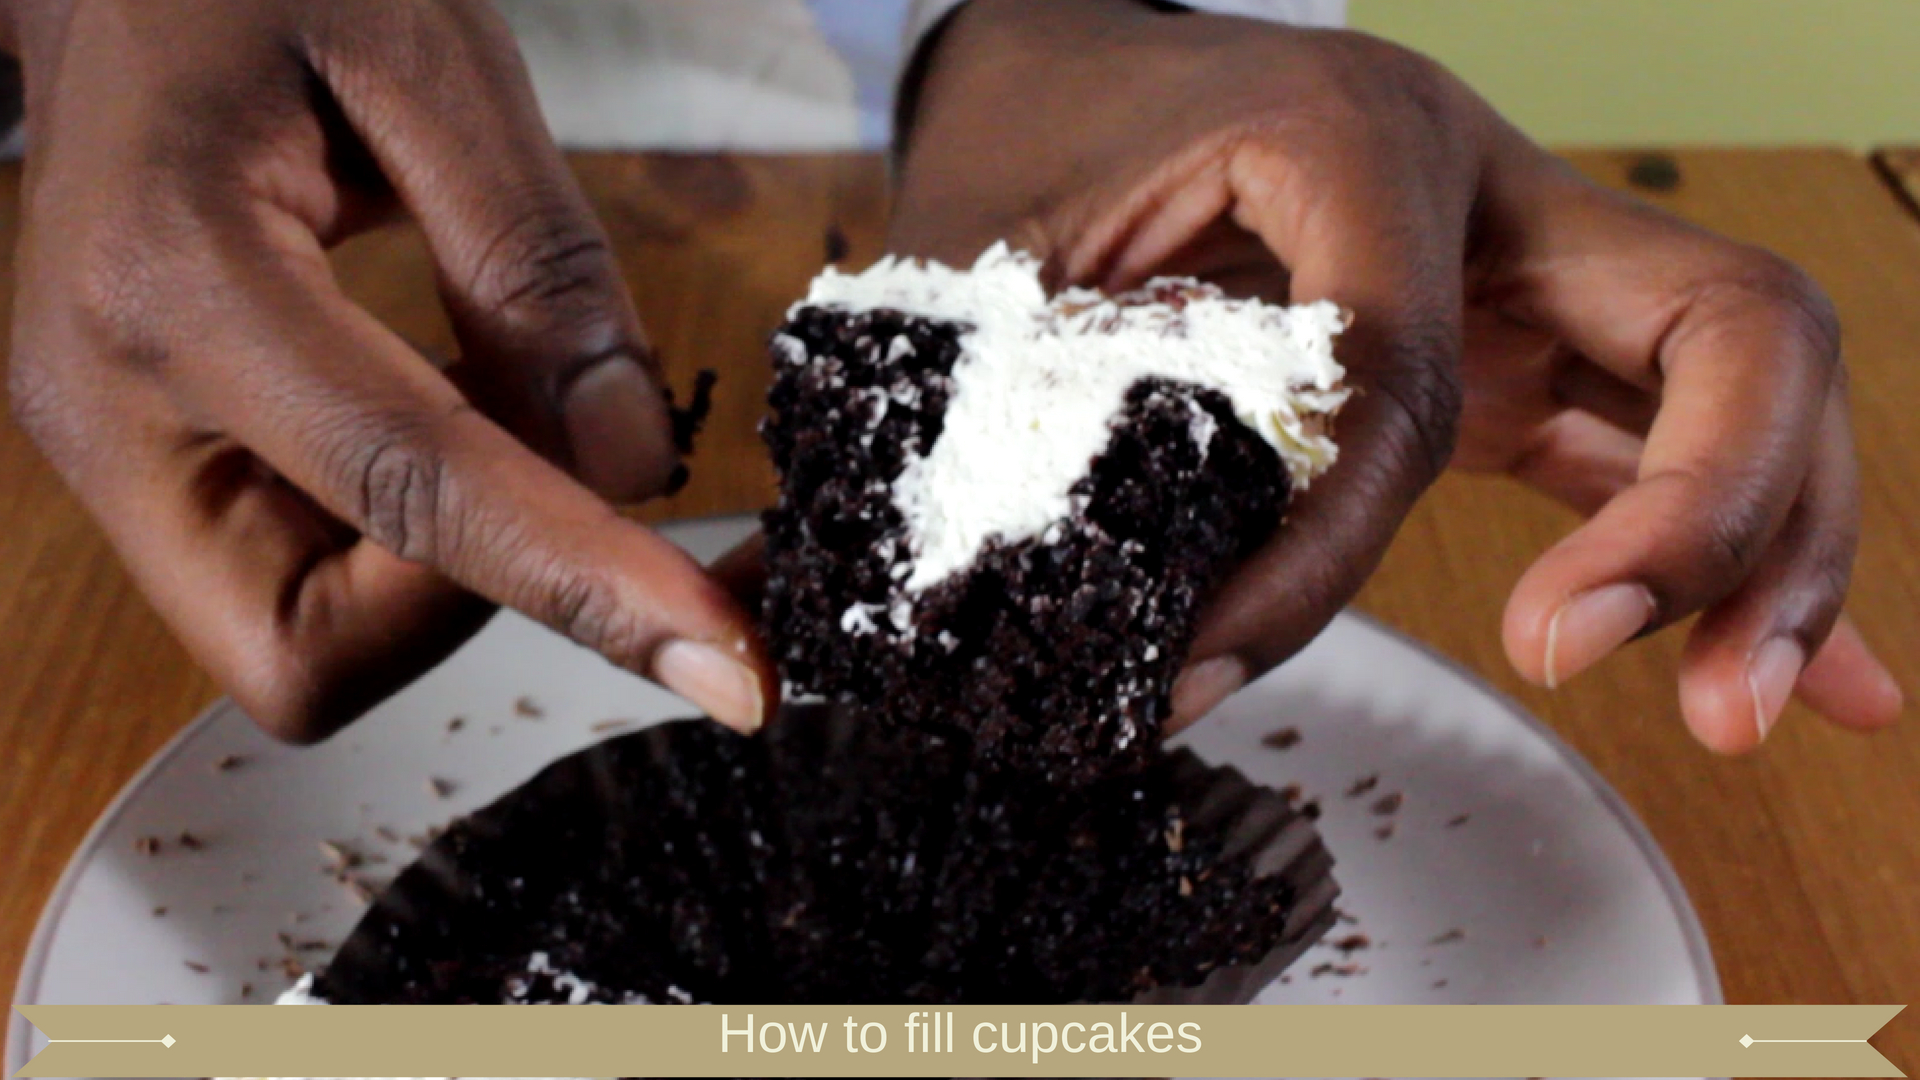 How to fill cupcakes